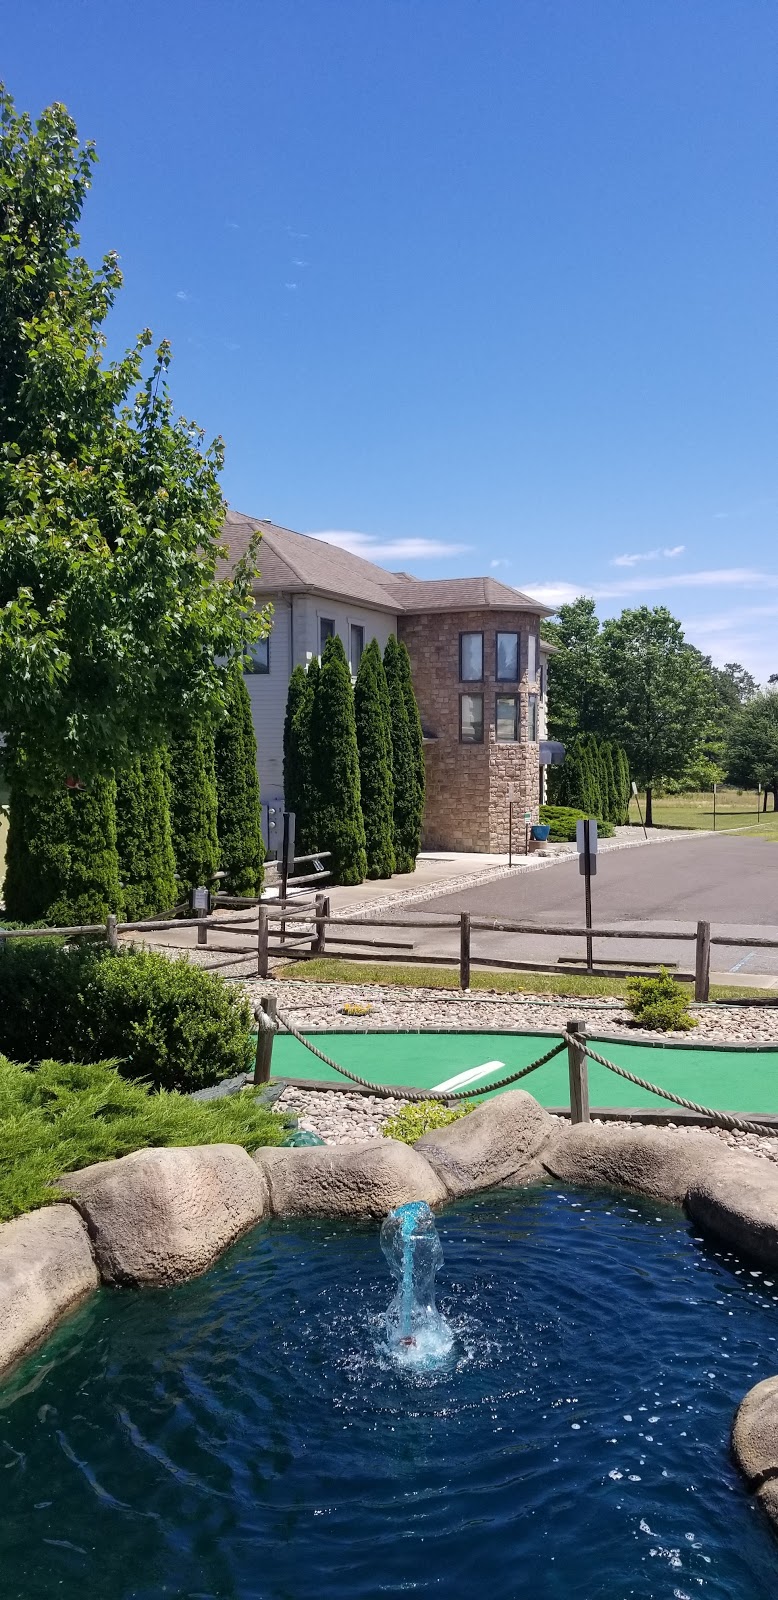 Manchester Family Golf Center | 2156 Route 37 West, Manchester Township, NJ 08759 | Phone: (732) 657-3227